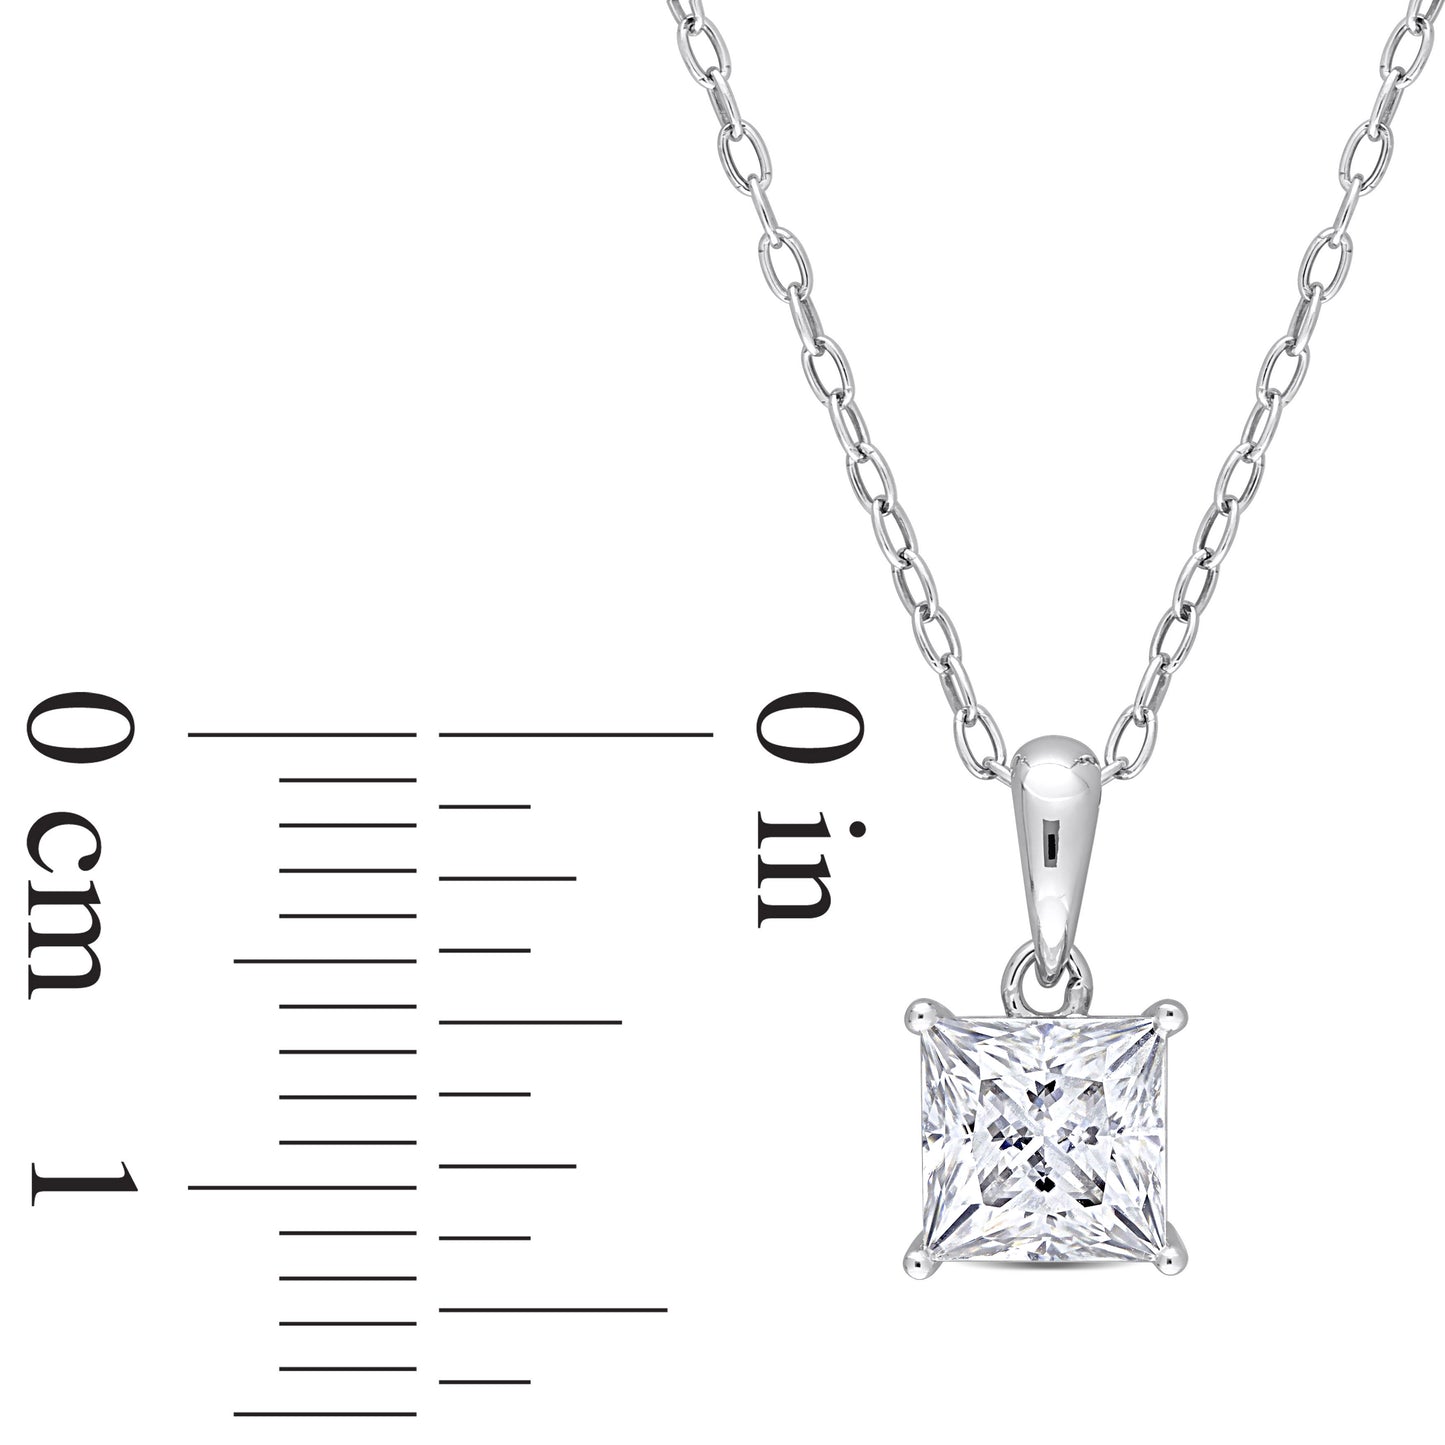 1 1/4ct Princess Cut Moissanite Solitaire Necklace in Sterling Silver